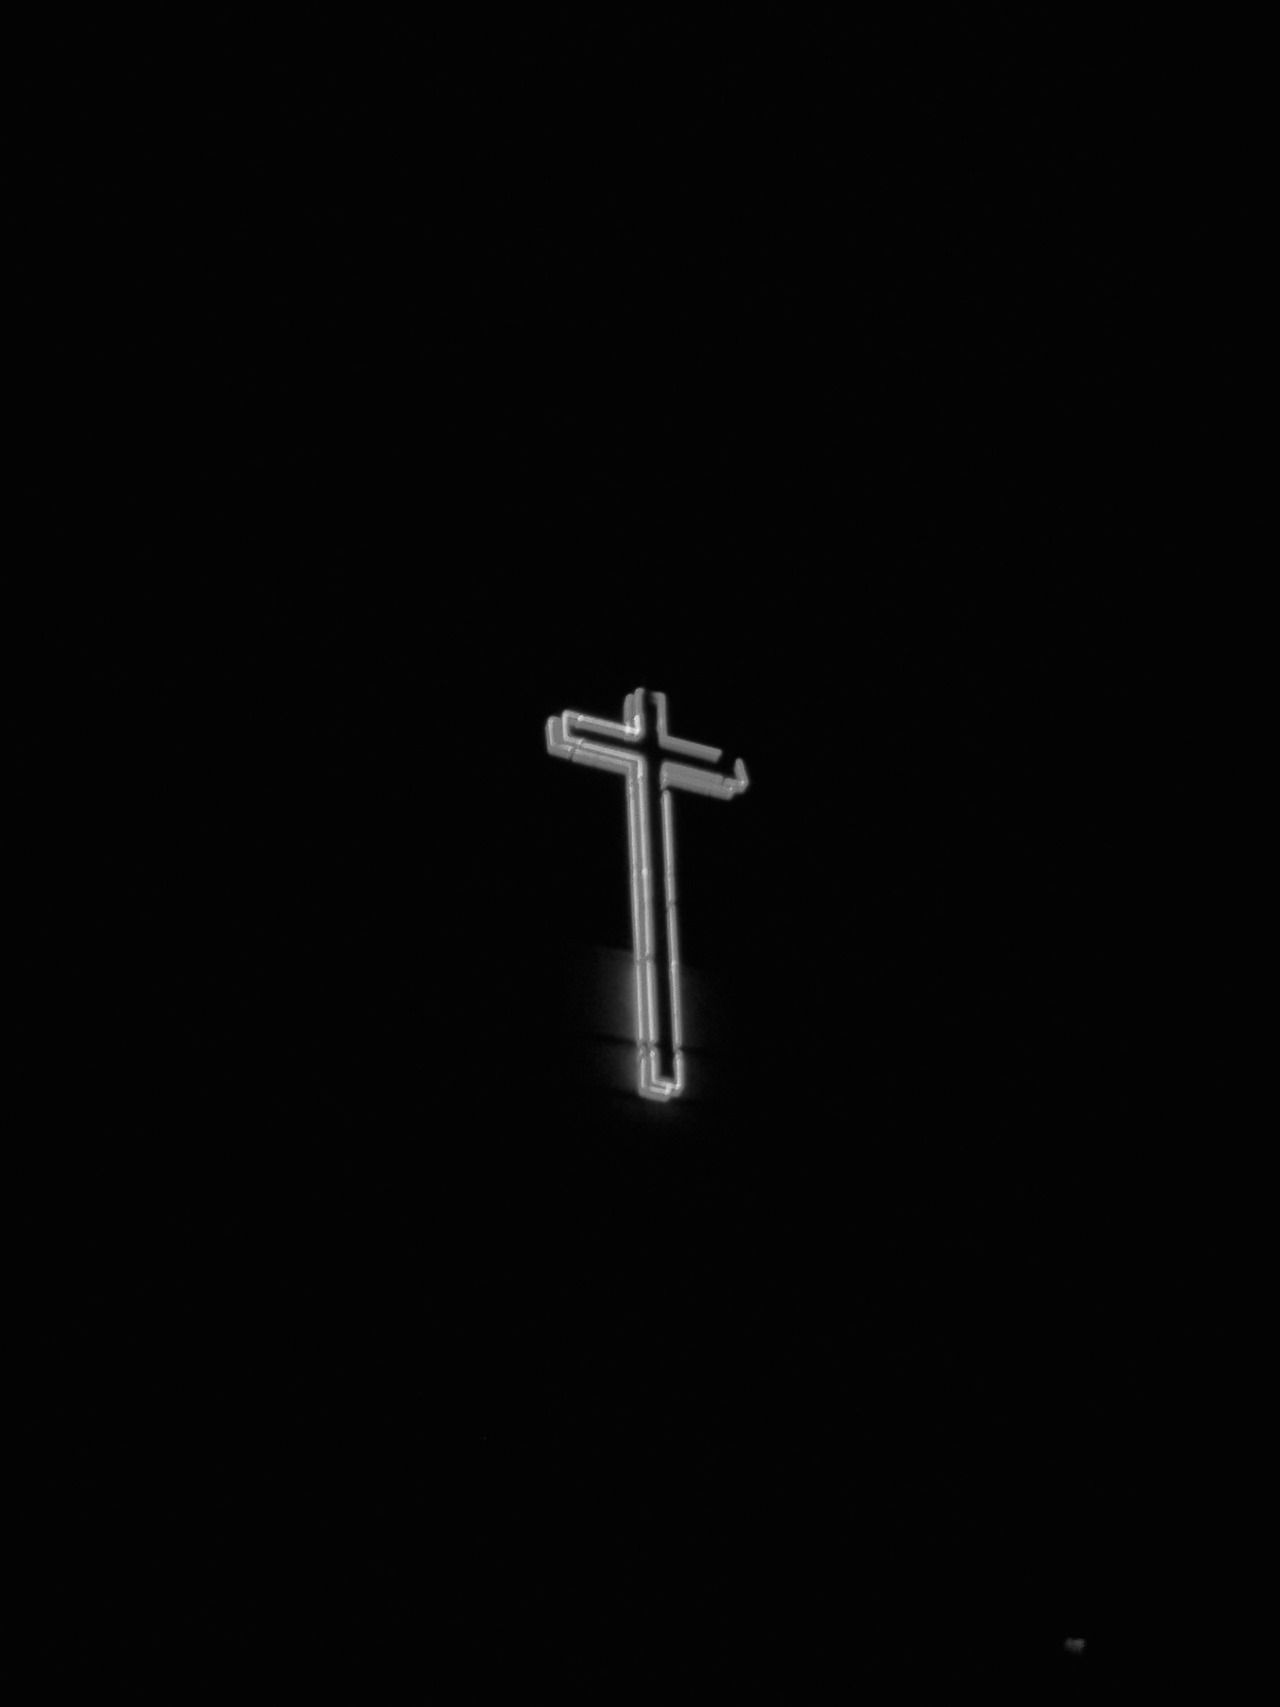 A black and white image of a cross against a black background. The cross is made up of white lines and appears to be glowing. The image is set in a square format. - Cross